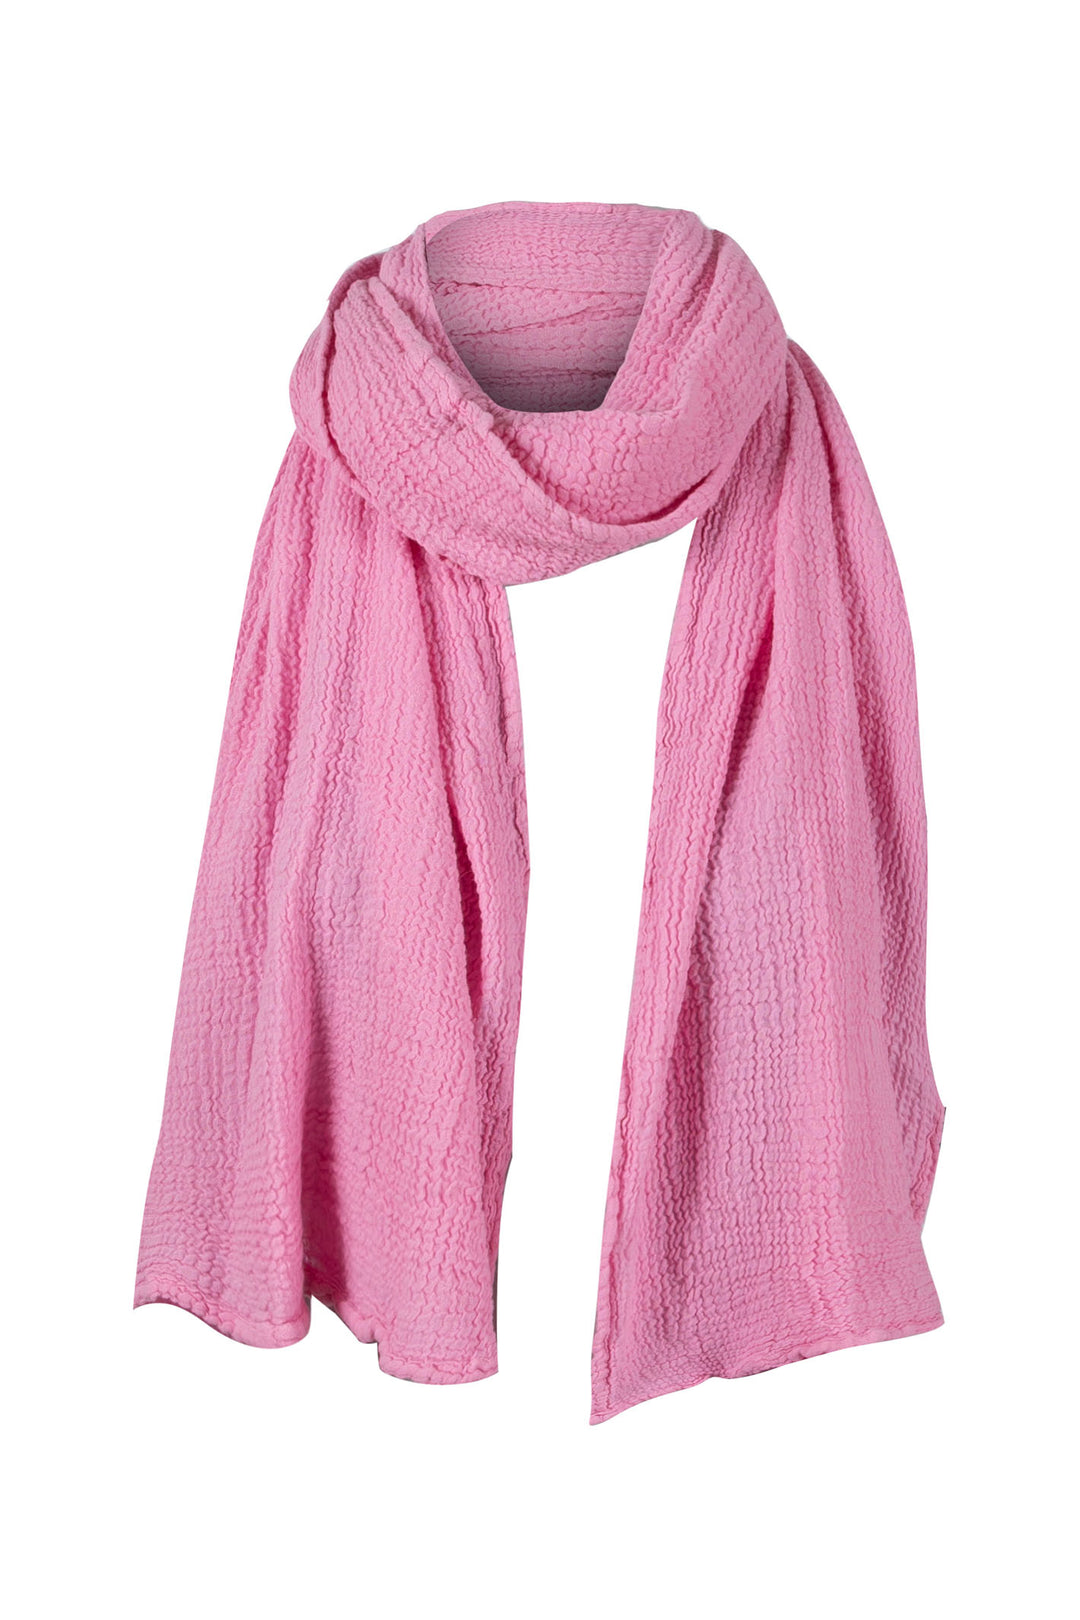 Onelife A523 Shawl Fondant Pink Cotton Shawl - Experience Boutique